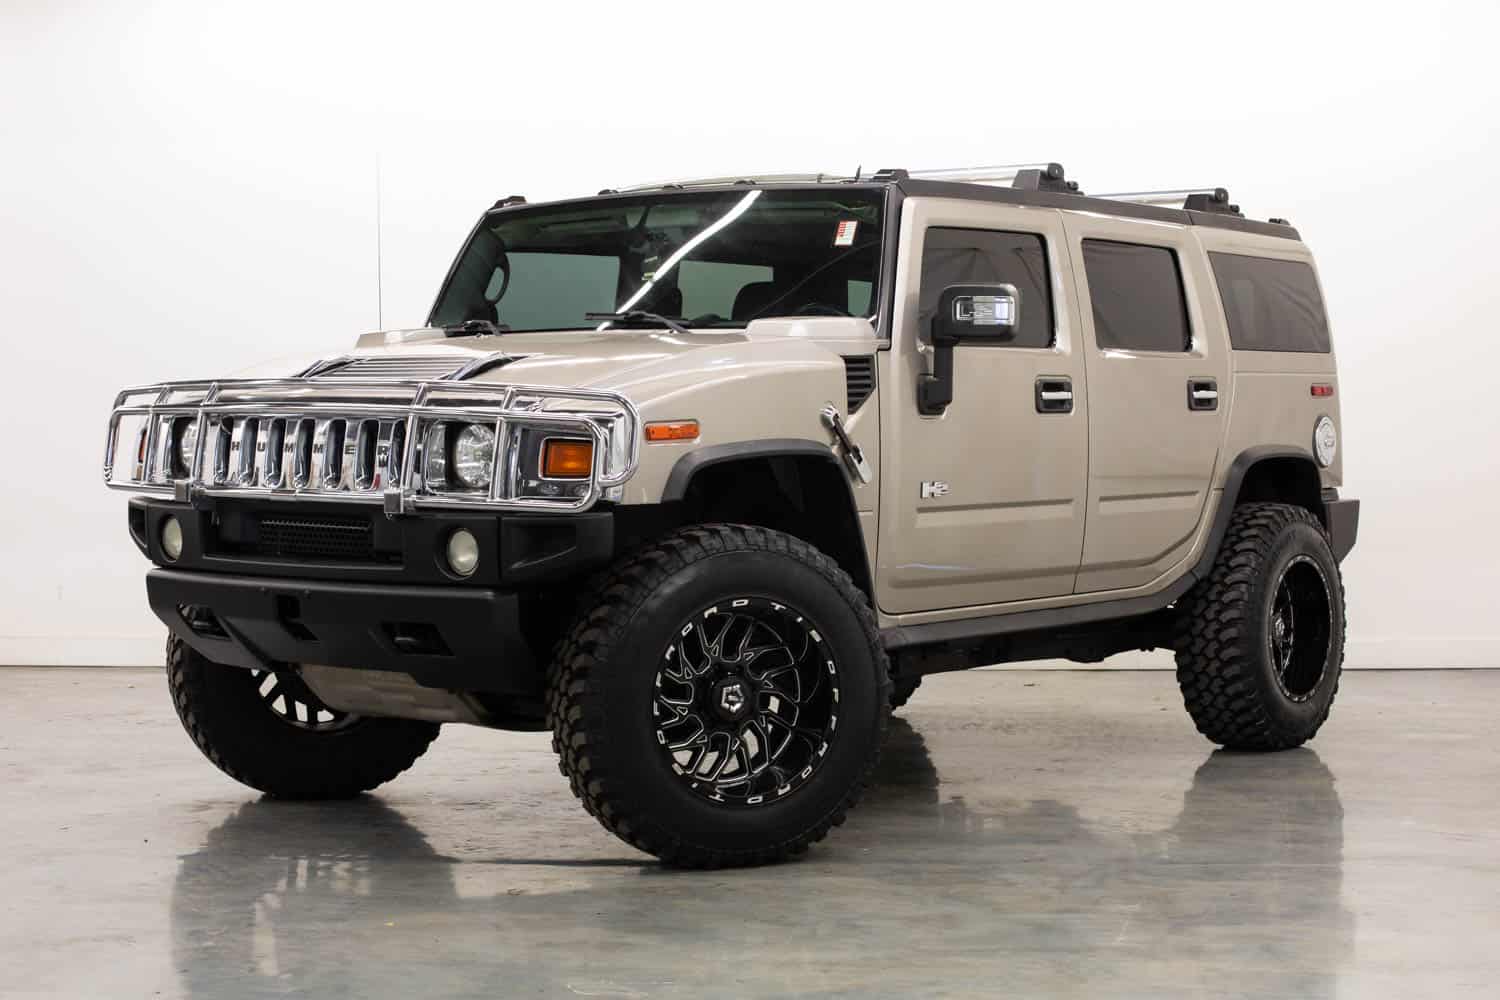 Lifted Hummer for Sale